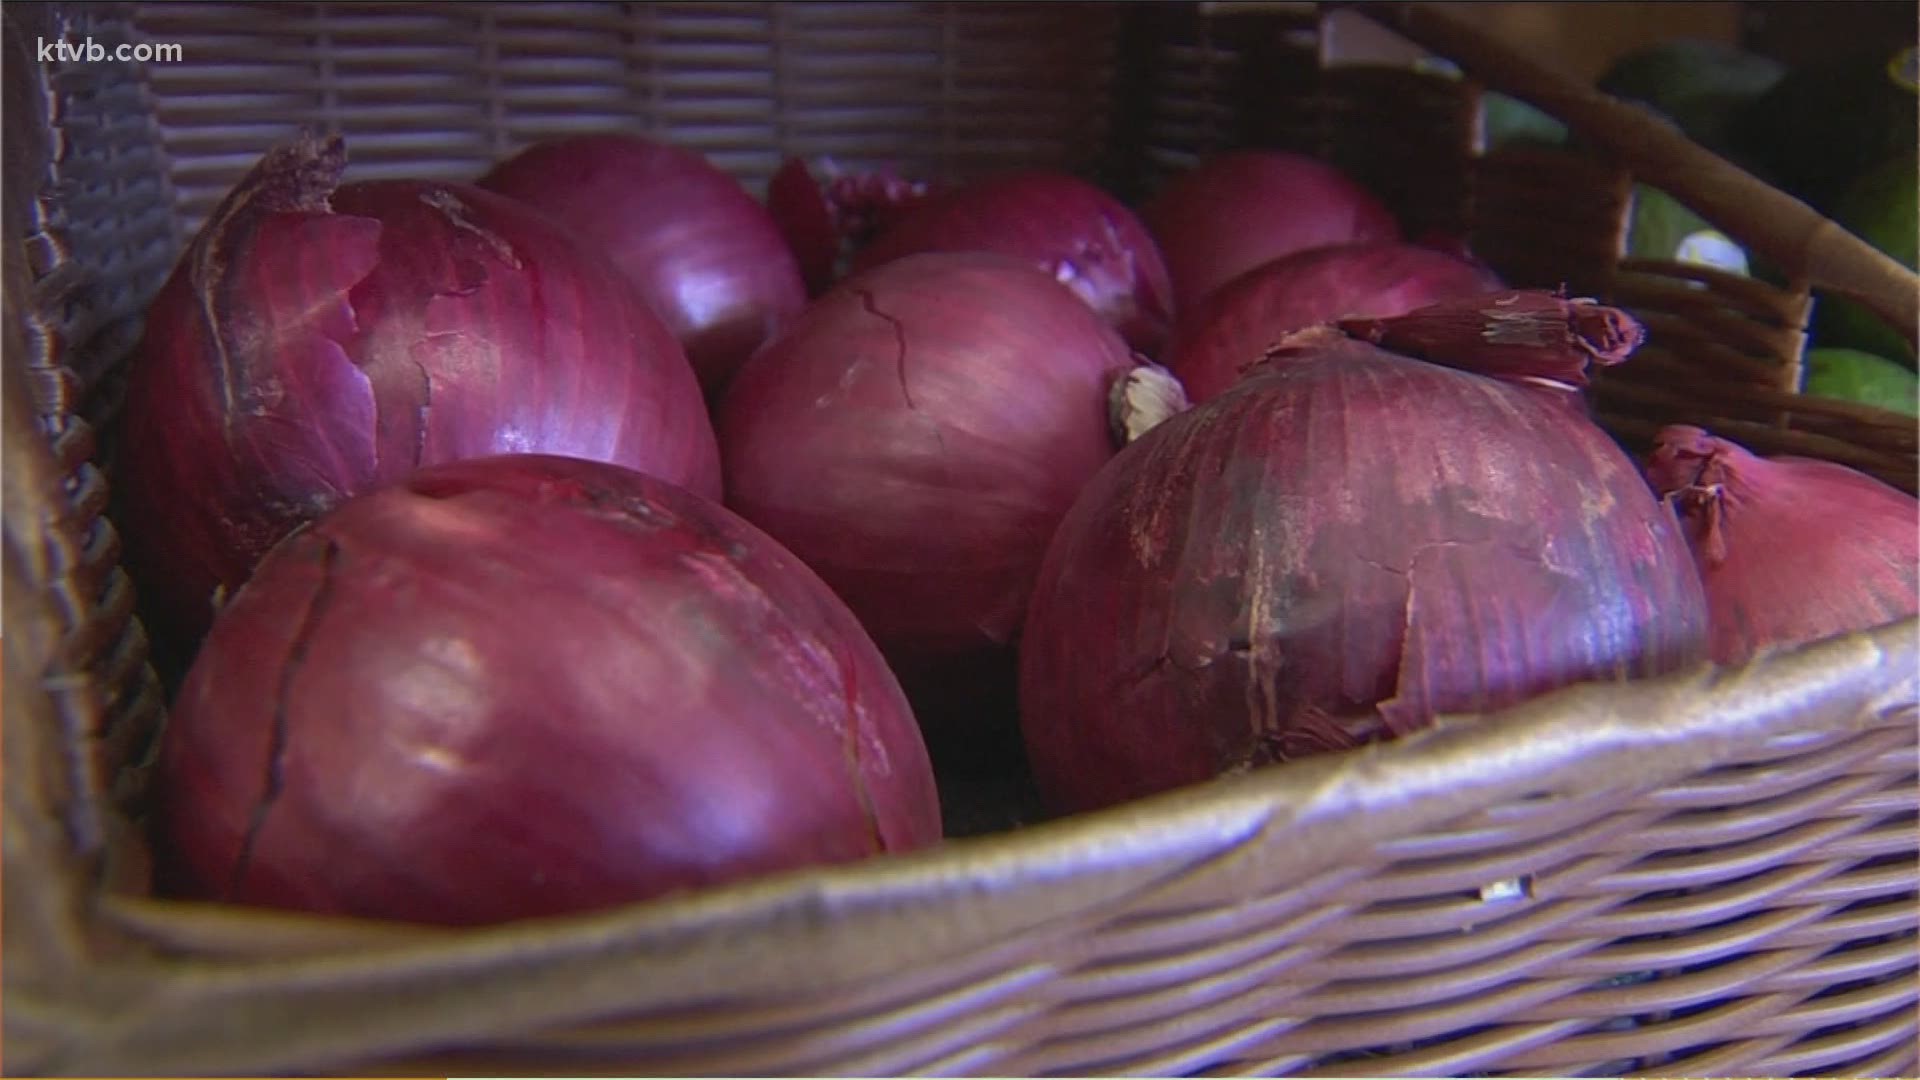 Health officials say people in 45 states including Idaho have gotten sick eating onions.